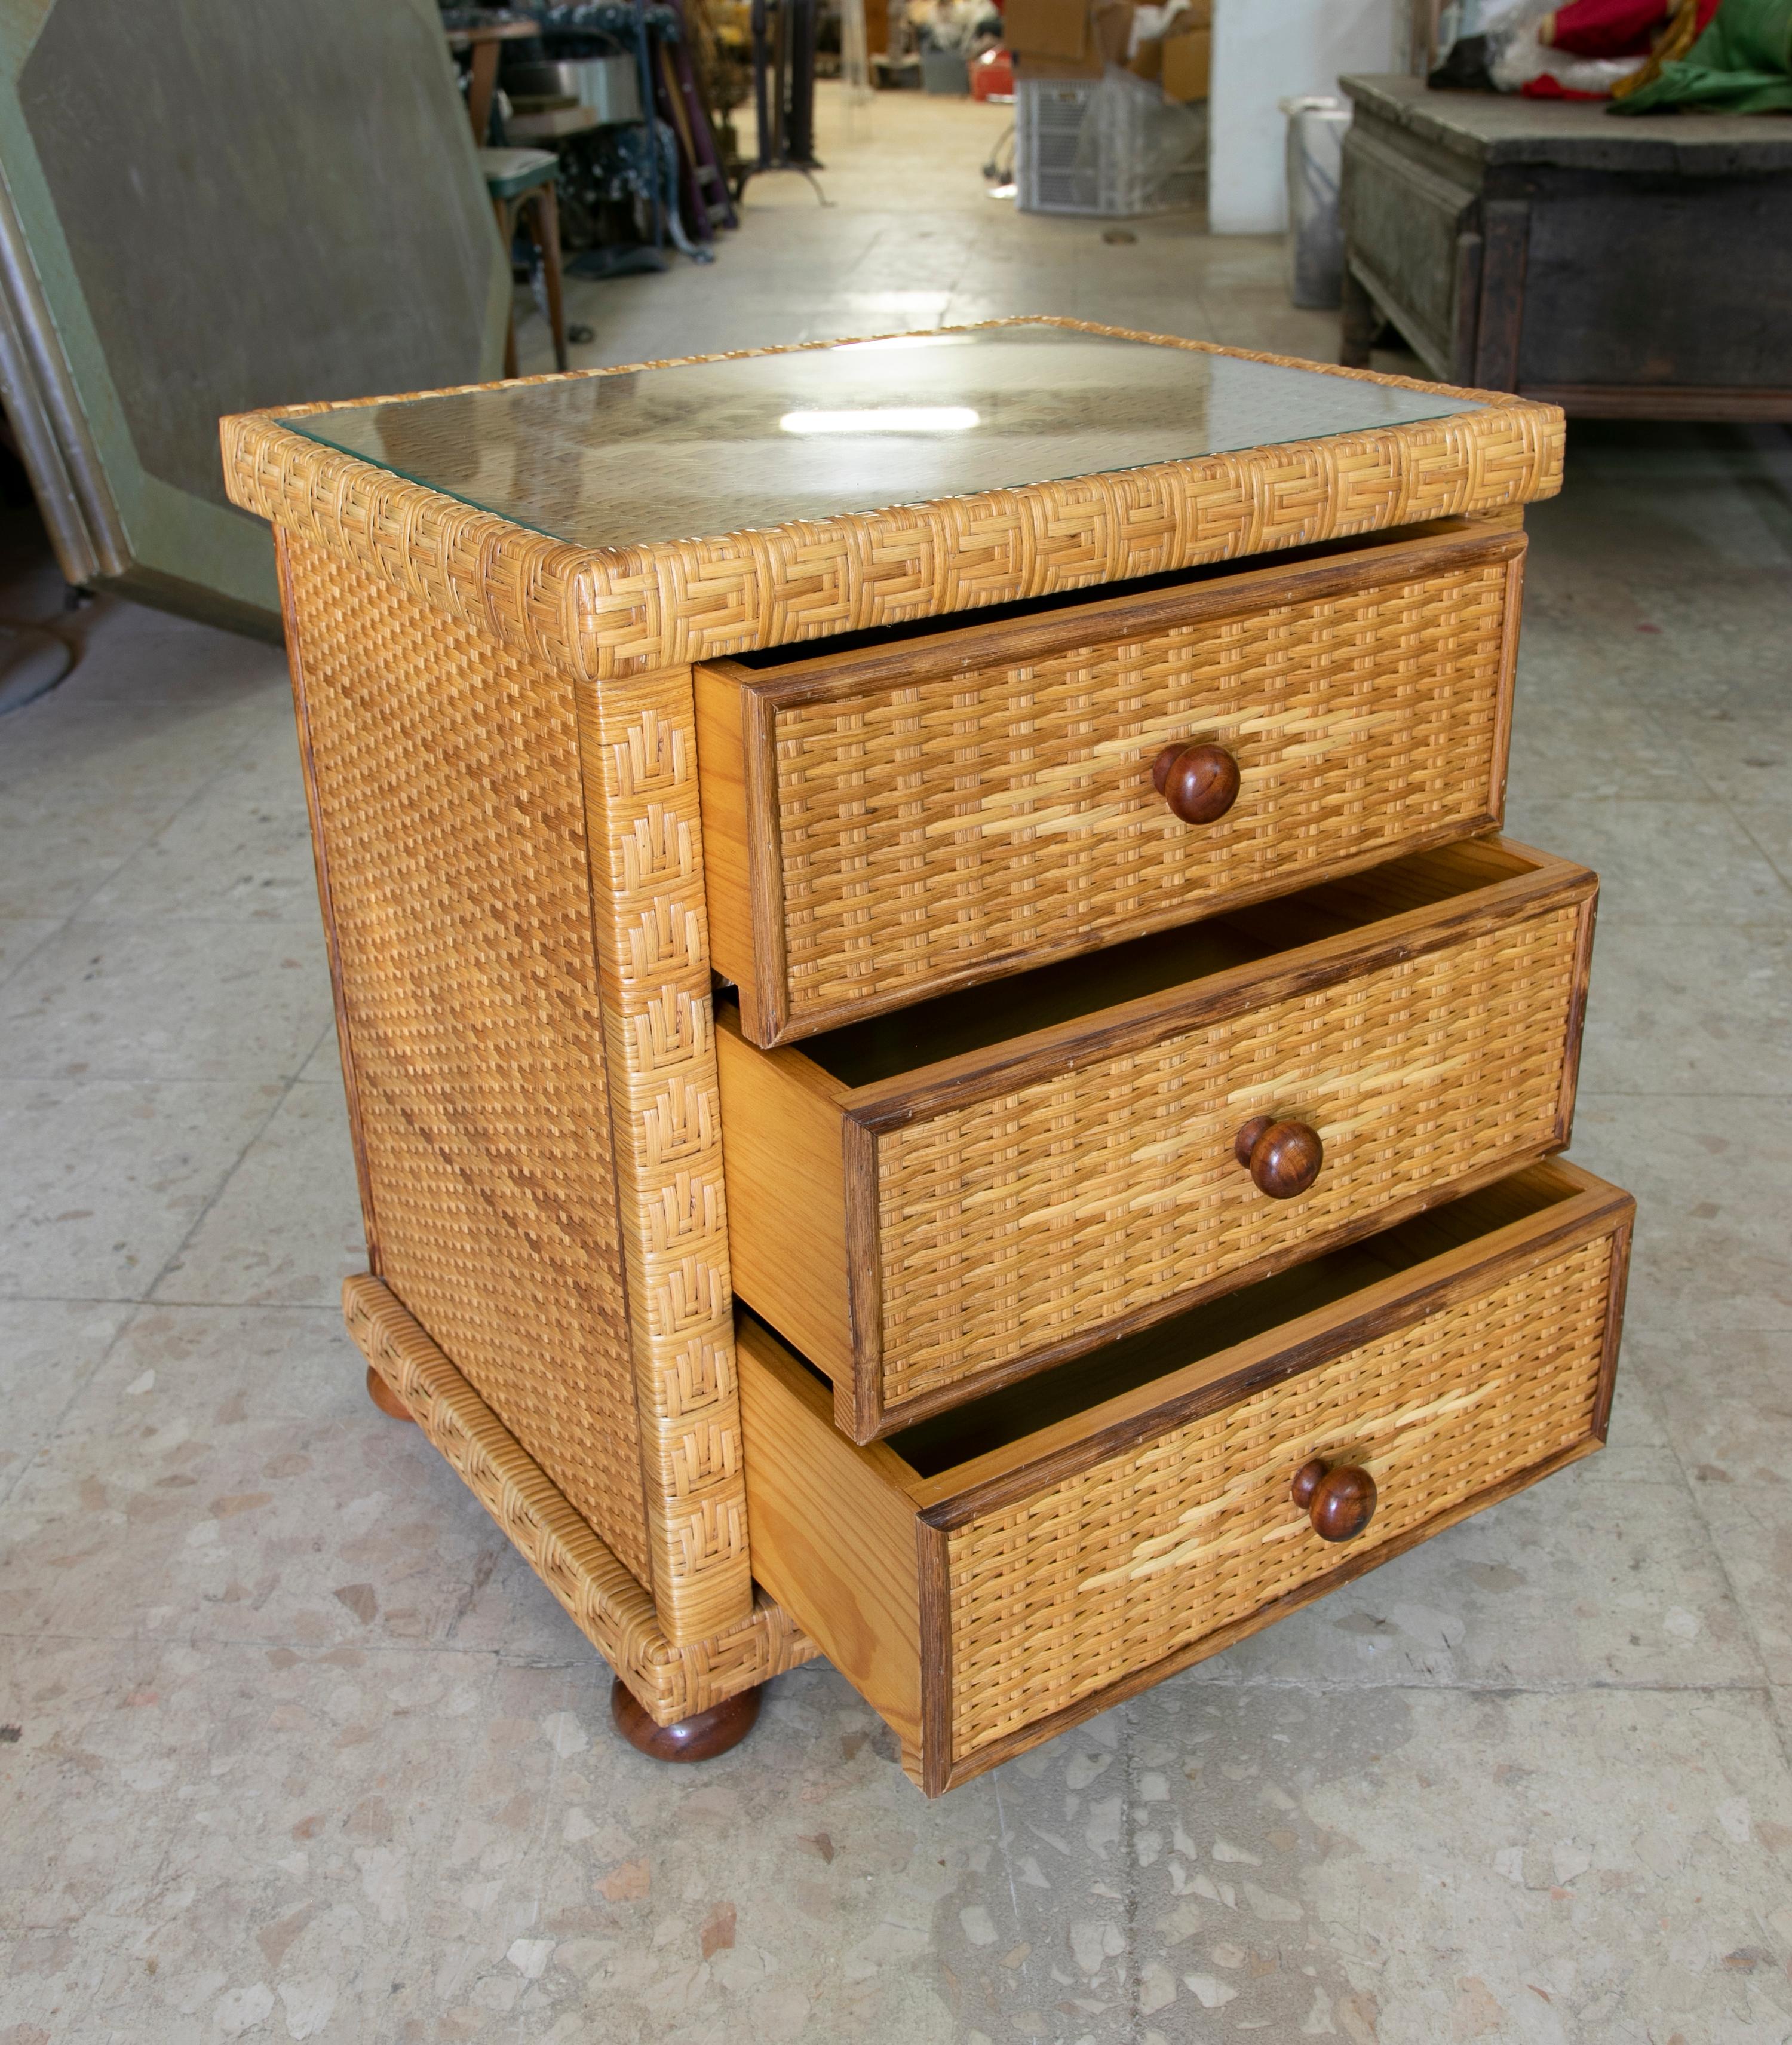 1980s Handmade wicker sidetable with three drawers.